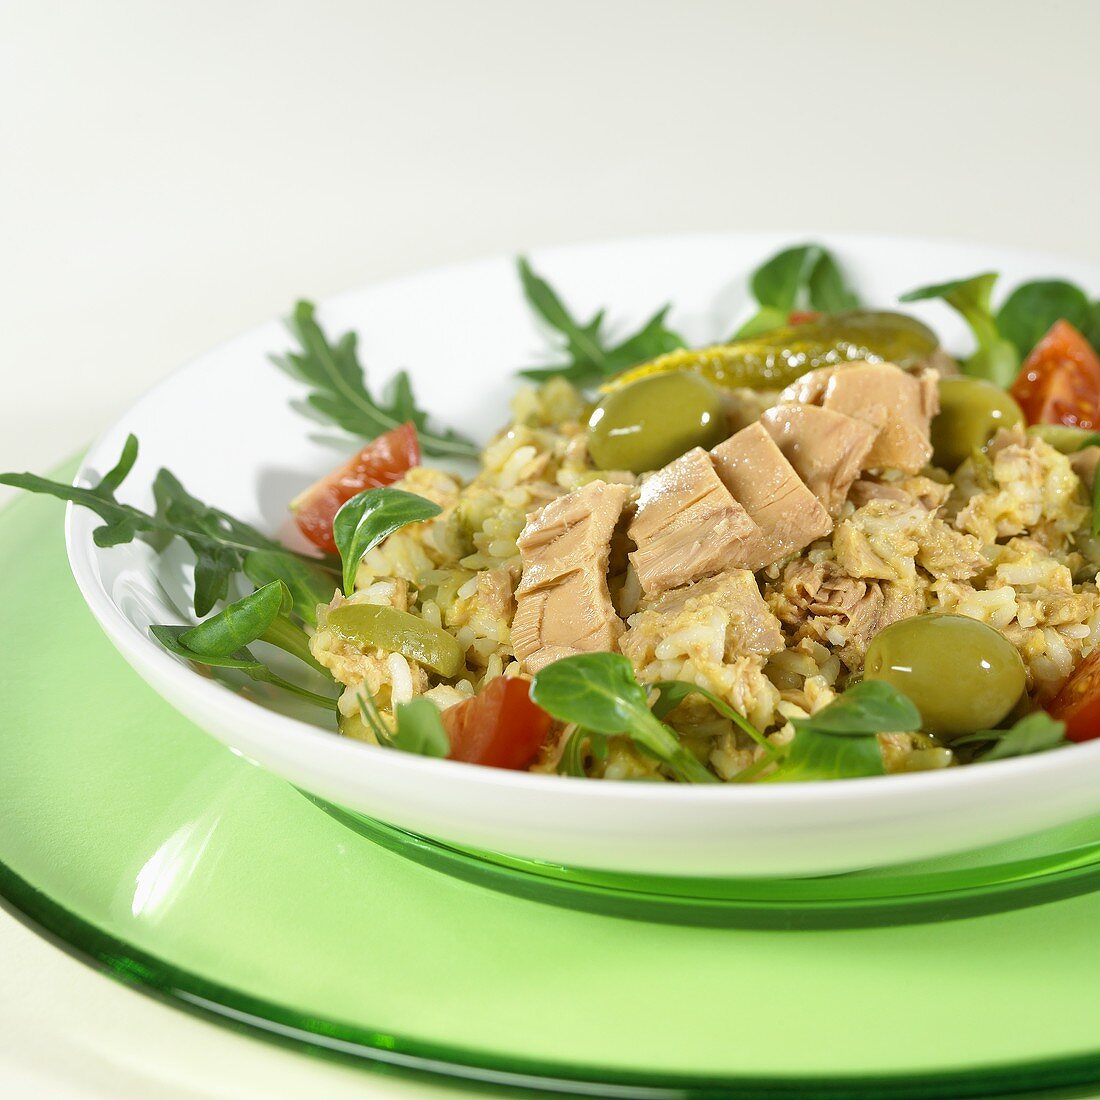 Rice salad with tuna and olives